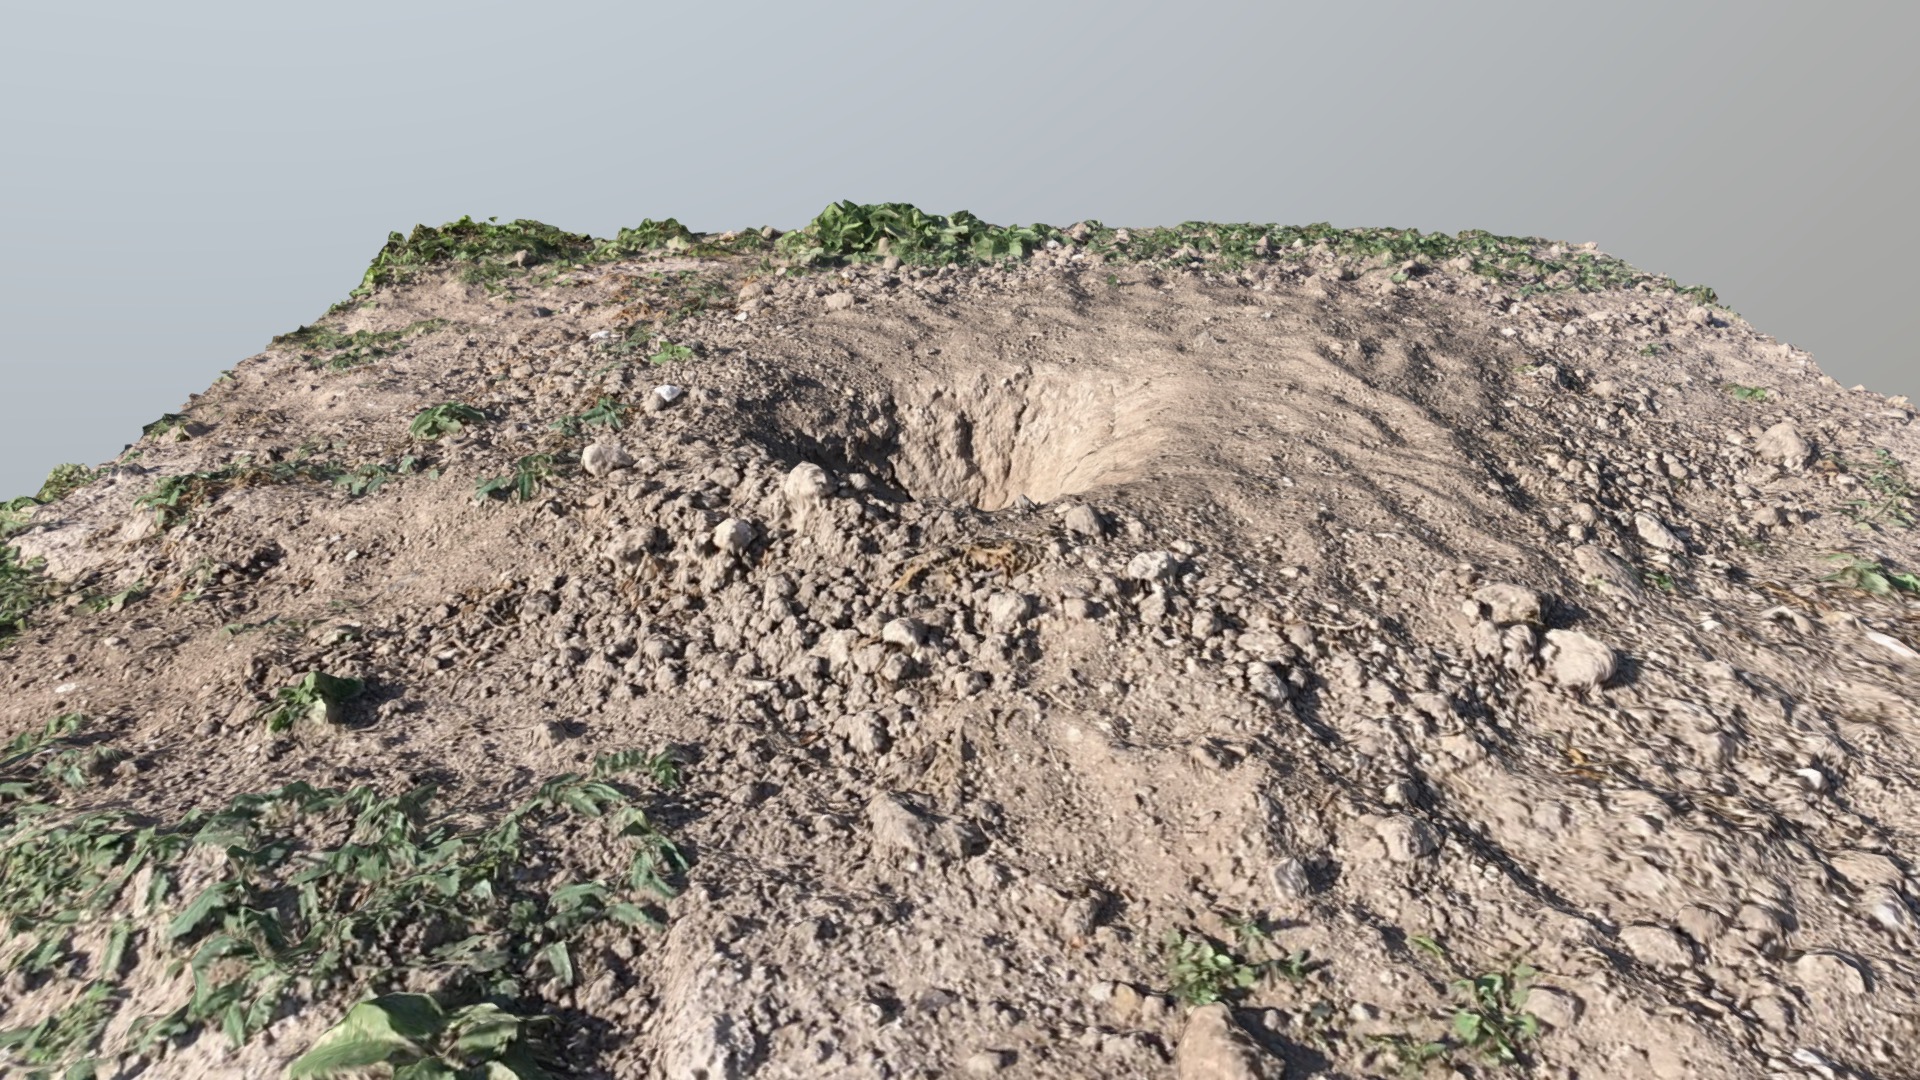 3D model Prairie Dog Hole 3 - This is a 3D model of the Prairie Dog Hole 3. The 3D model is about a rocky hill with plants on it.